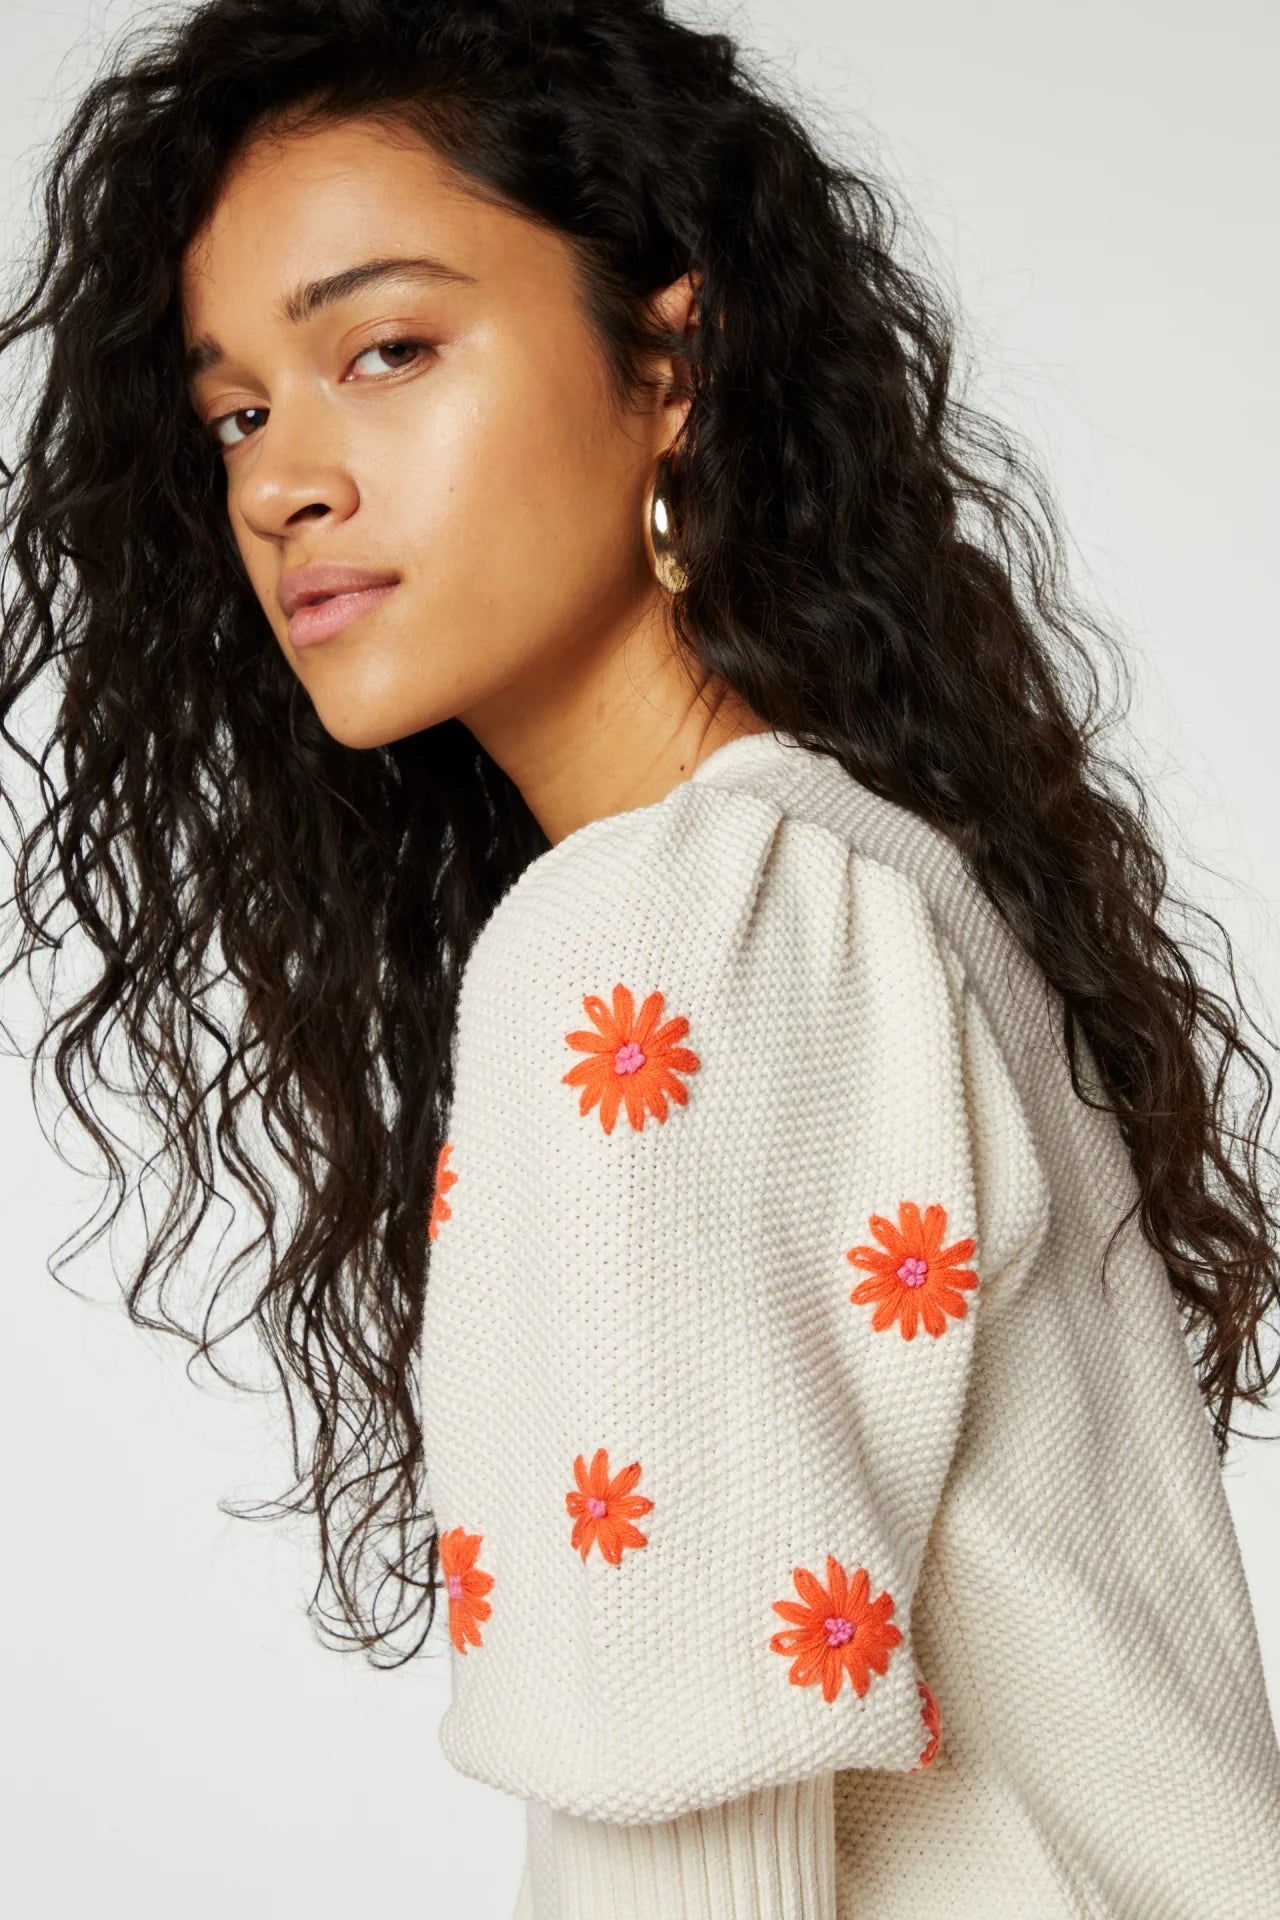 Model wears 3/4 sleeve knit jumper with orange embroidered flowers on sleeves